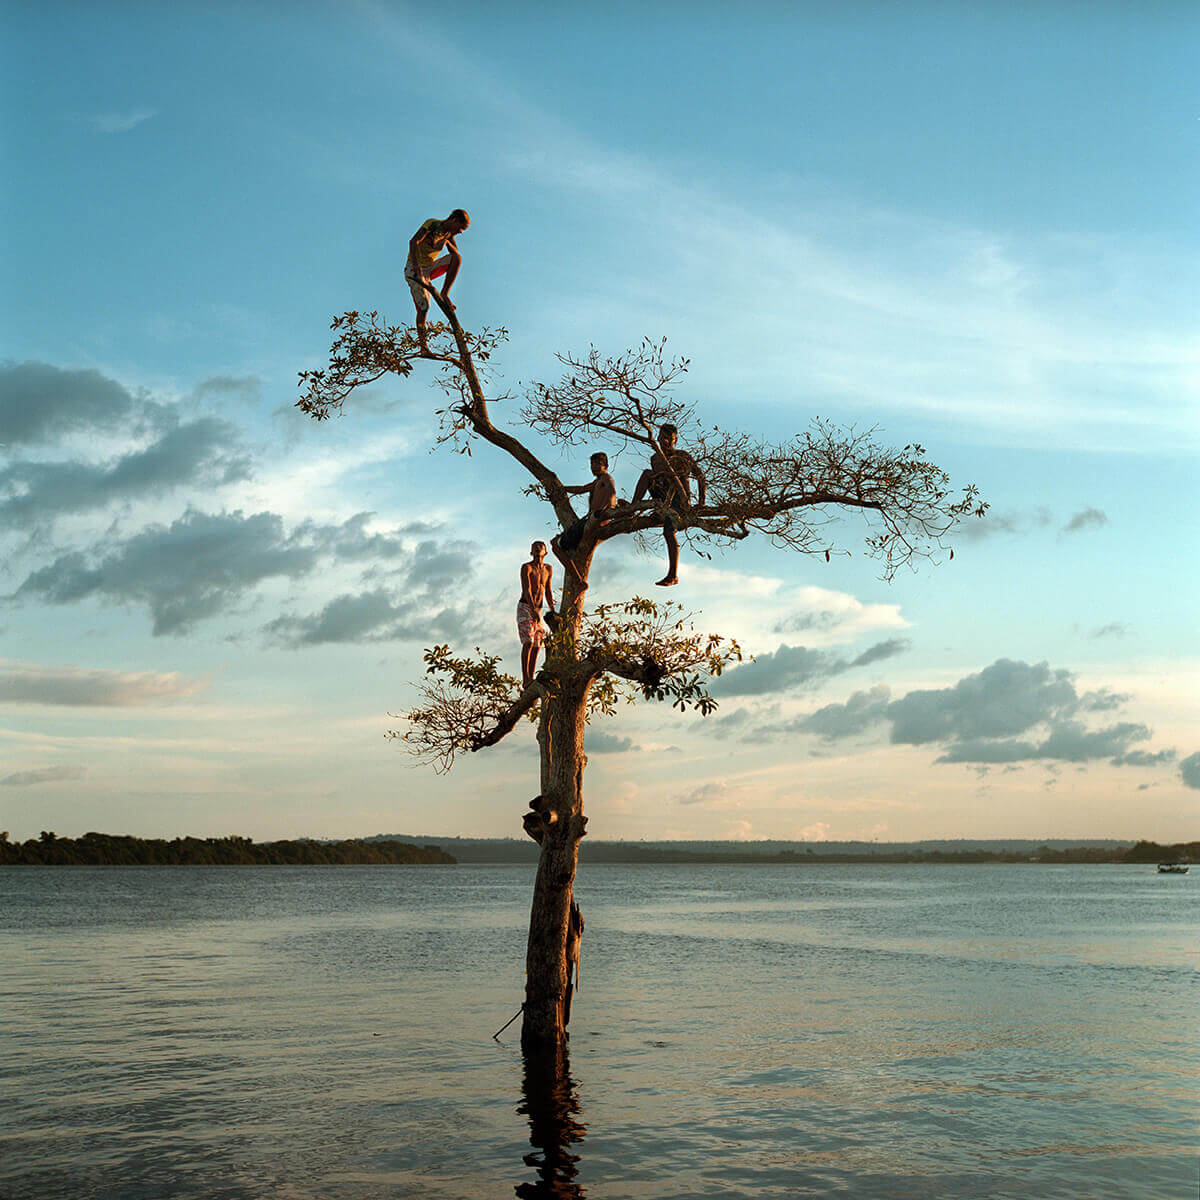 A photo of four Brazilian youths in a tree growing out of a large body of water.